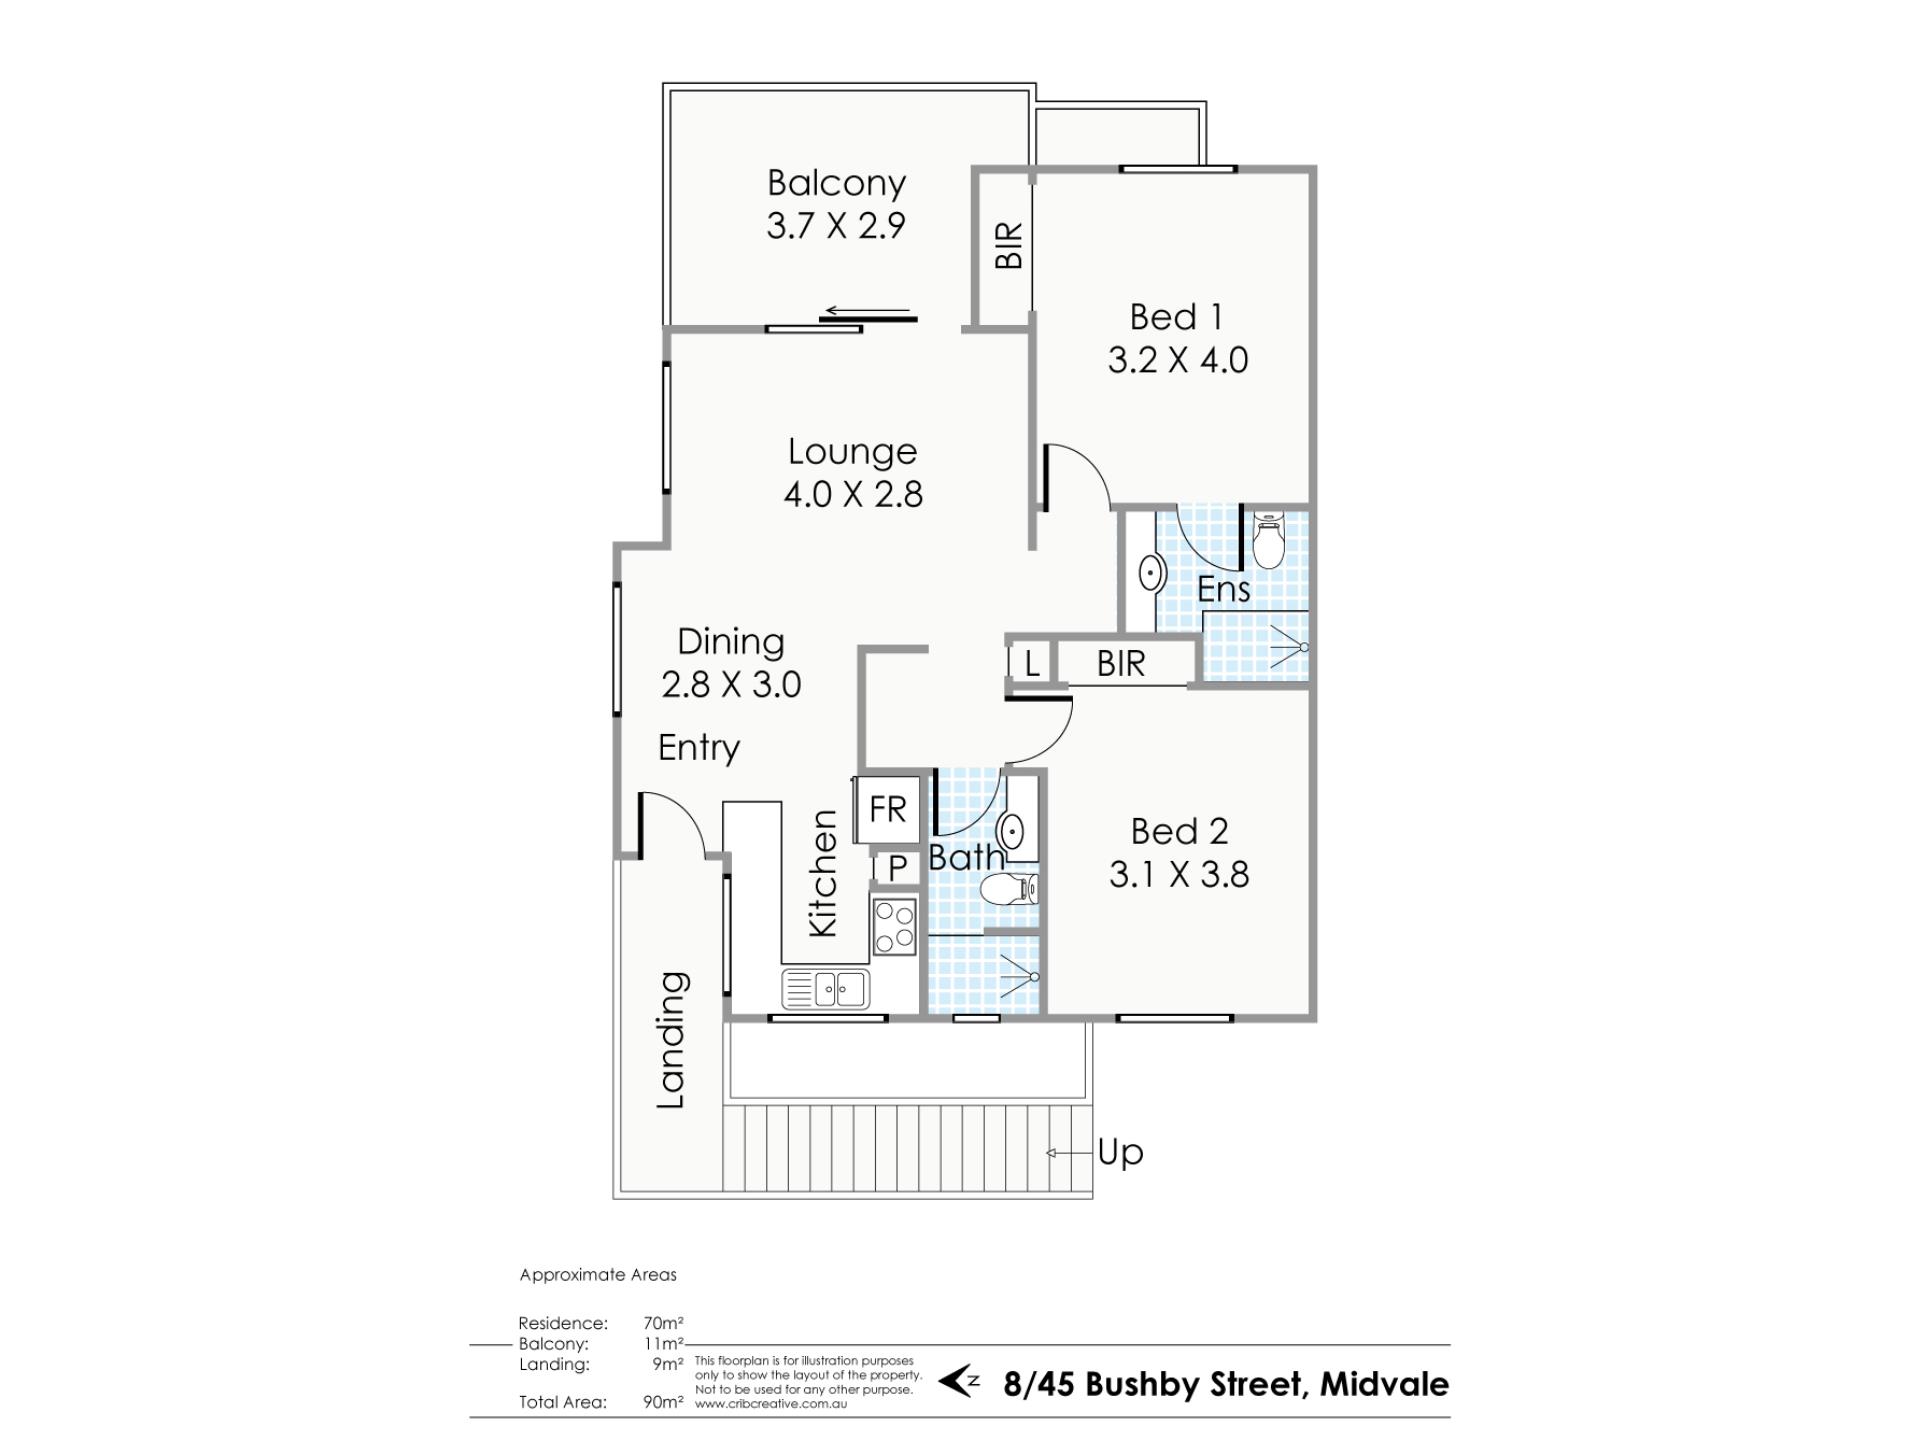 Property for sale in Midvale : Earnshaws Real Estate